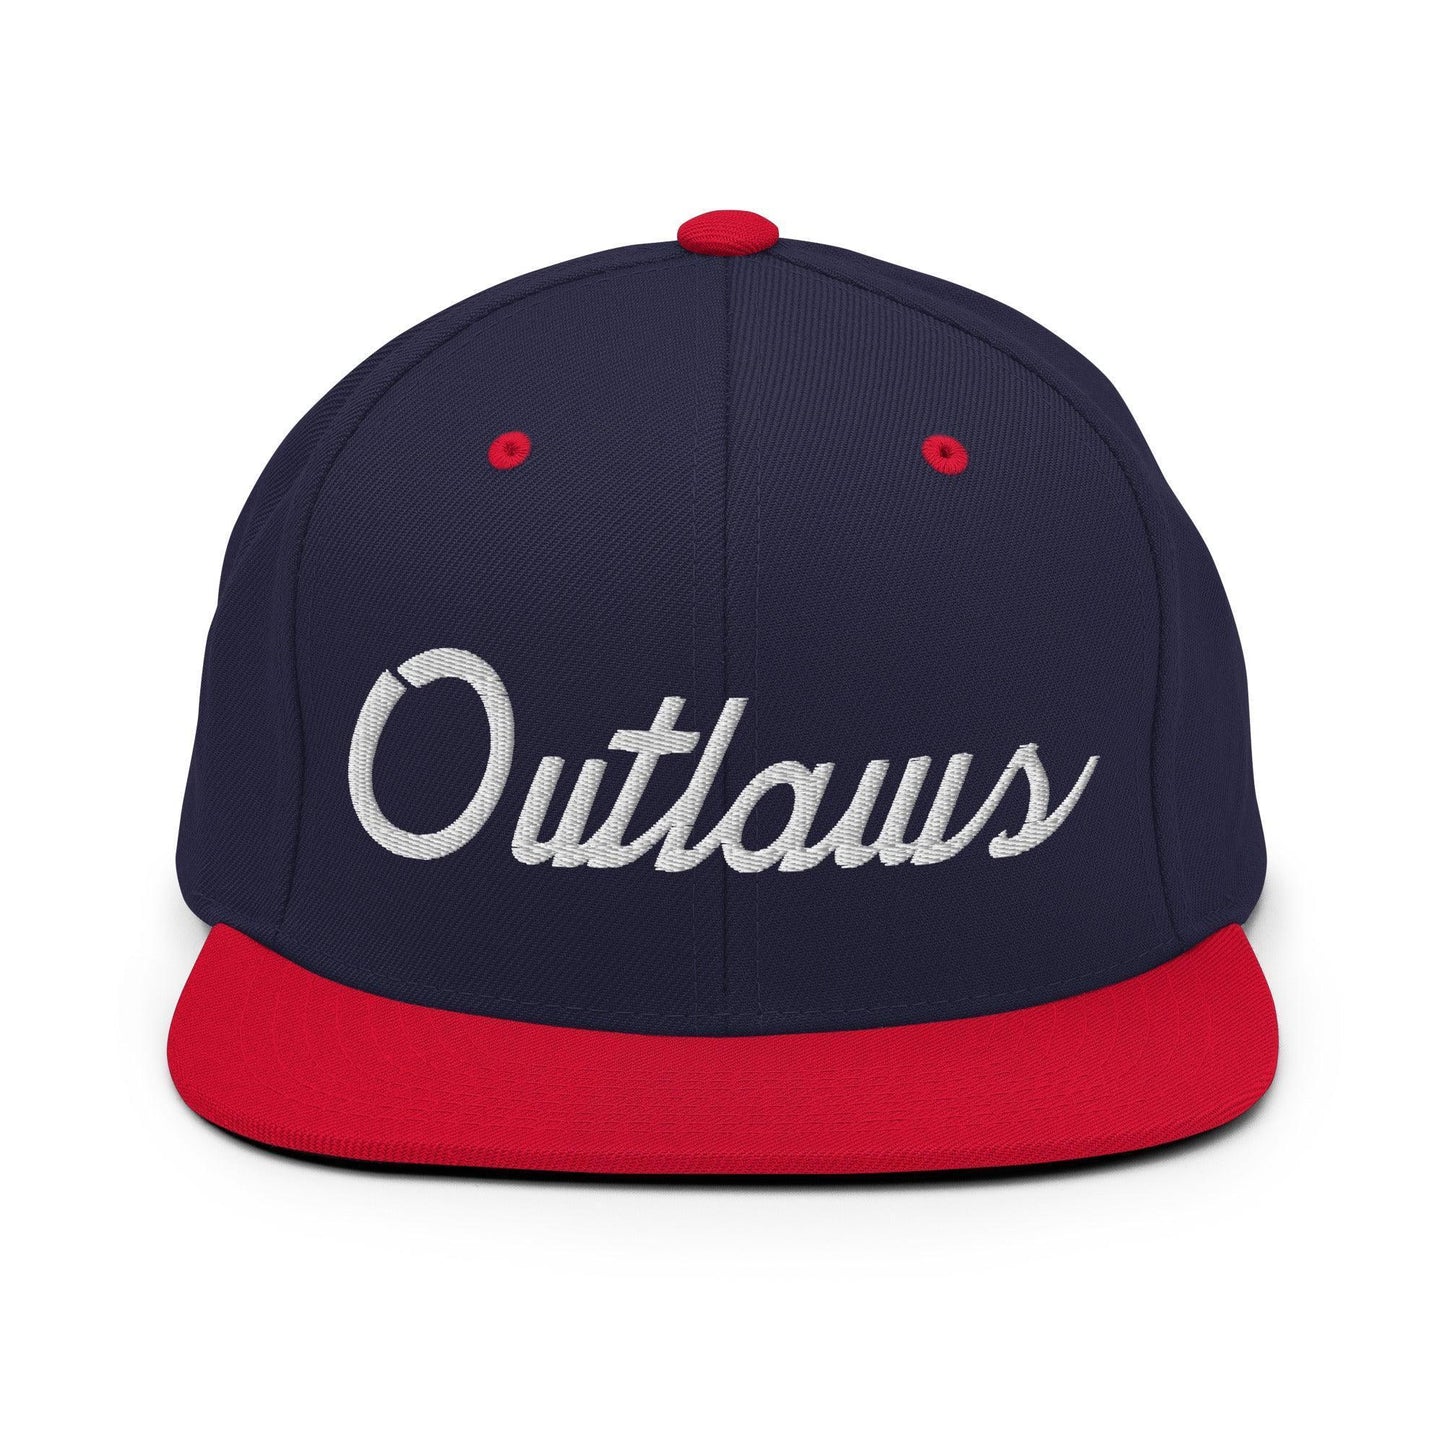 Outlaws School Mascot Script Snapback Hat Navy Red